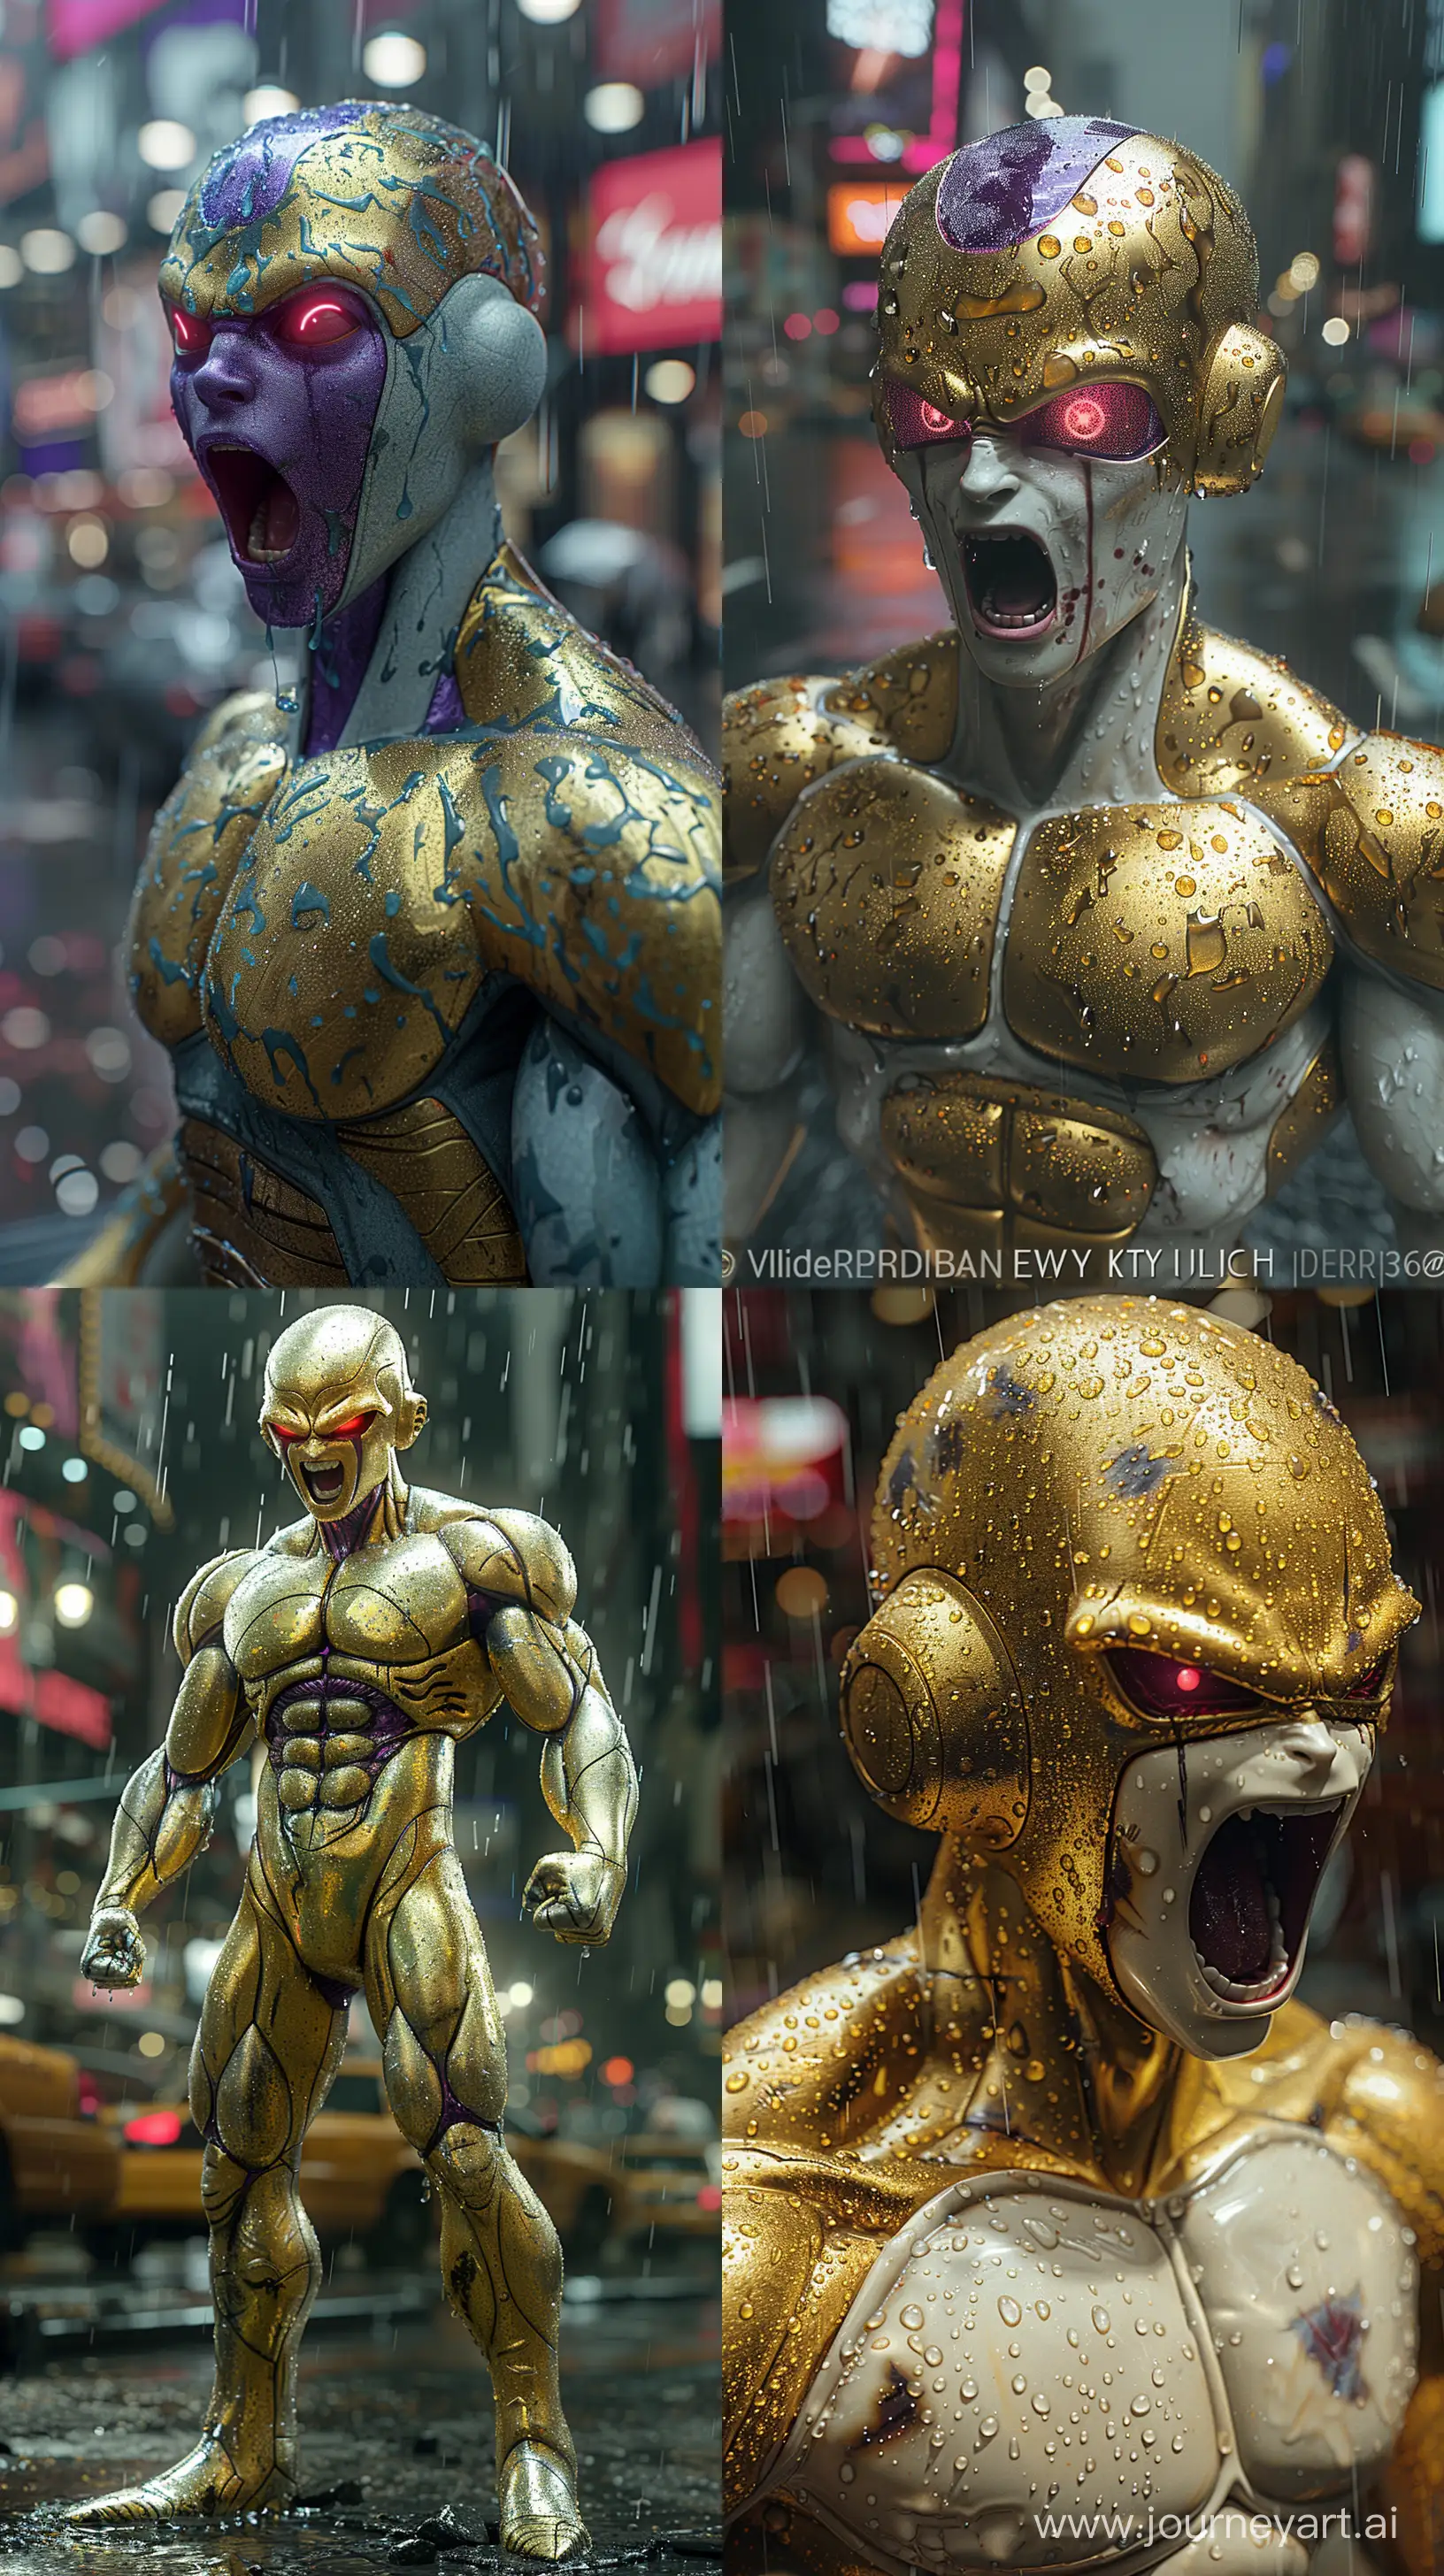 Sleek-GoldClad-Frieza-Strikes-in-RainDrenched-New-York-City